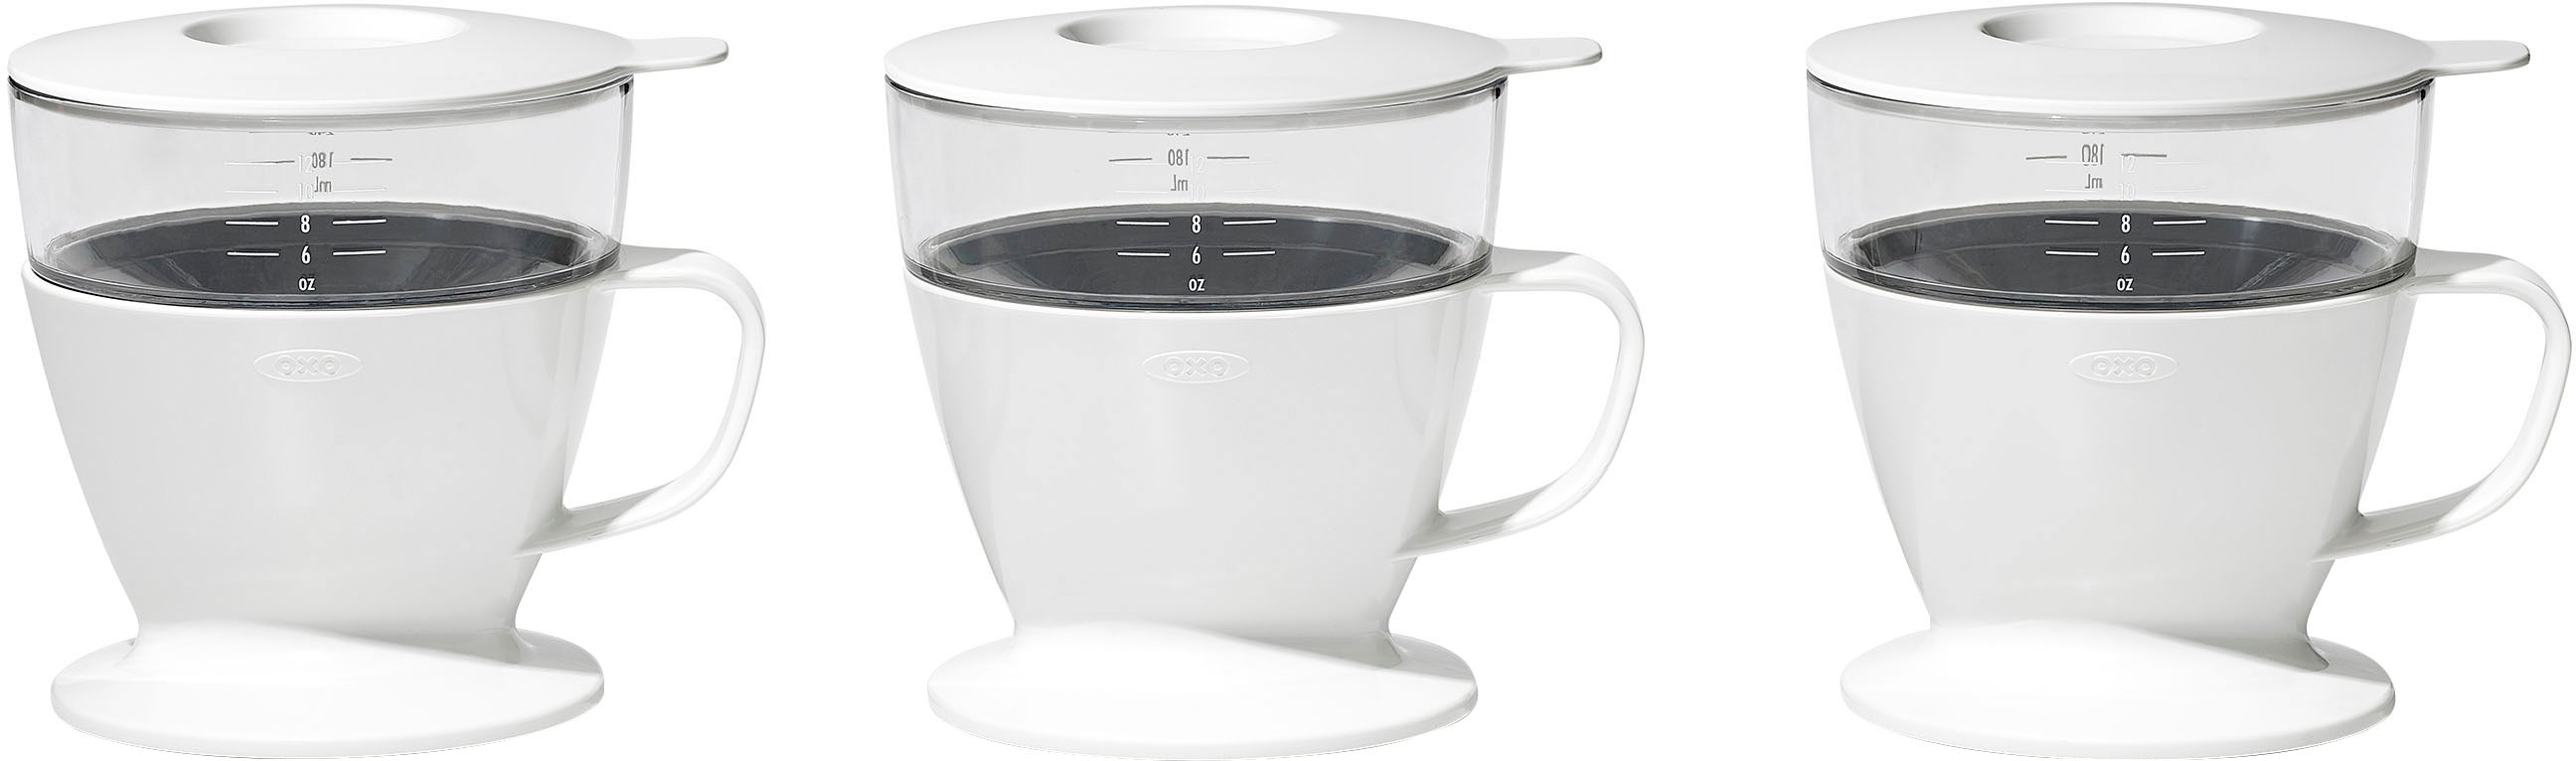 OXO 12 oz Good Grips Pour Over Coffee Maker with Water Tank, White